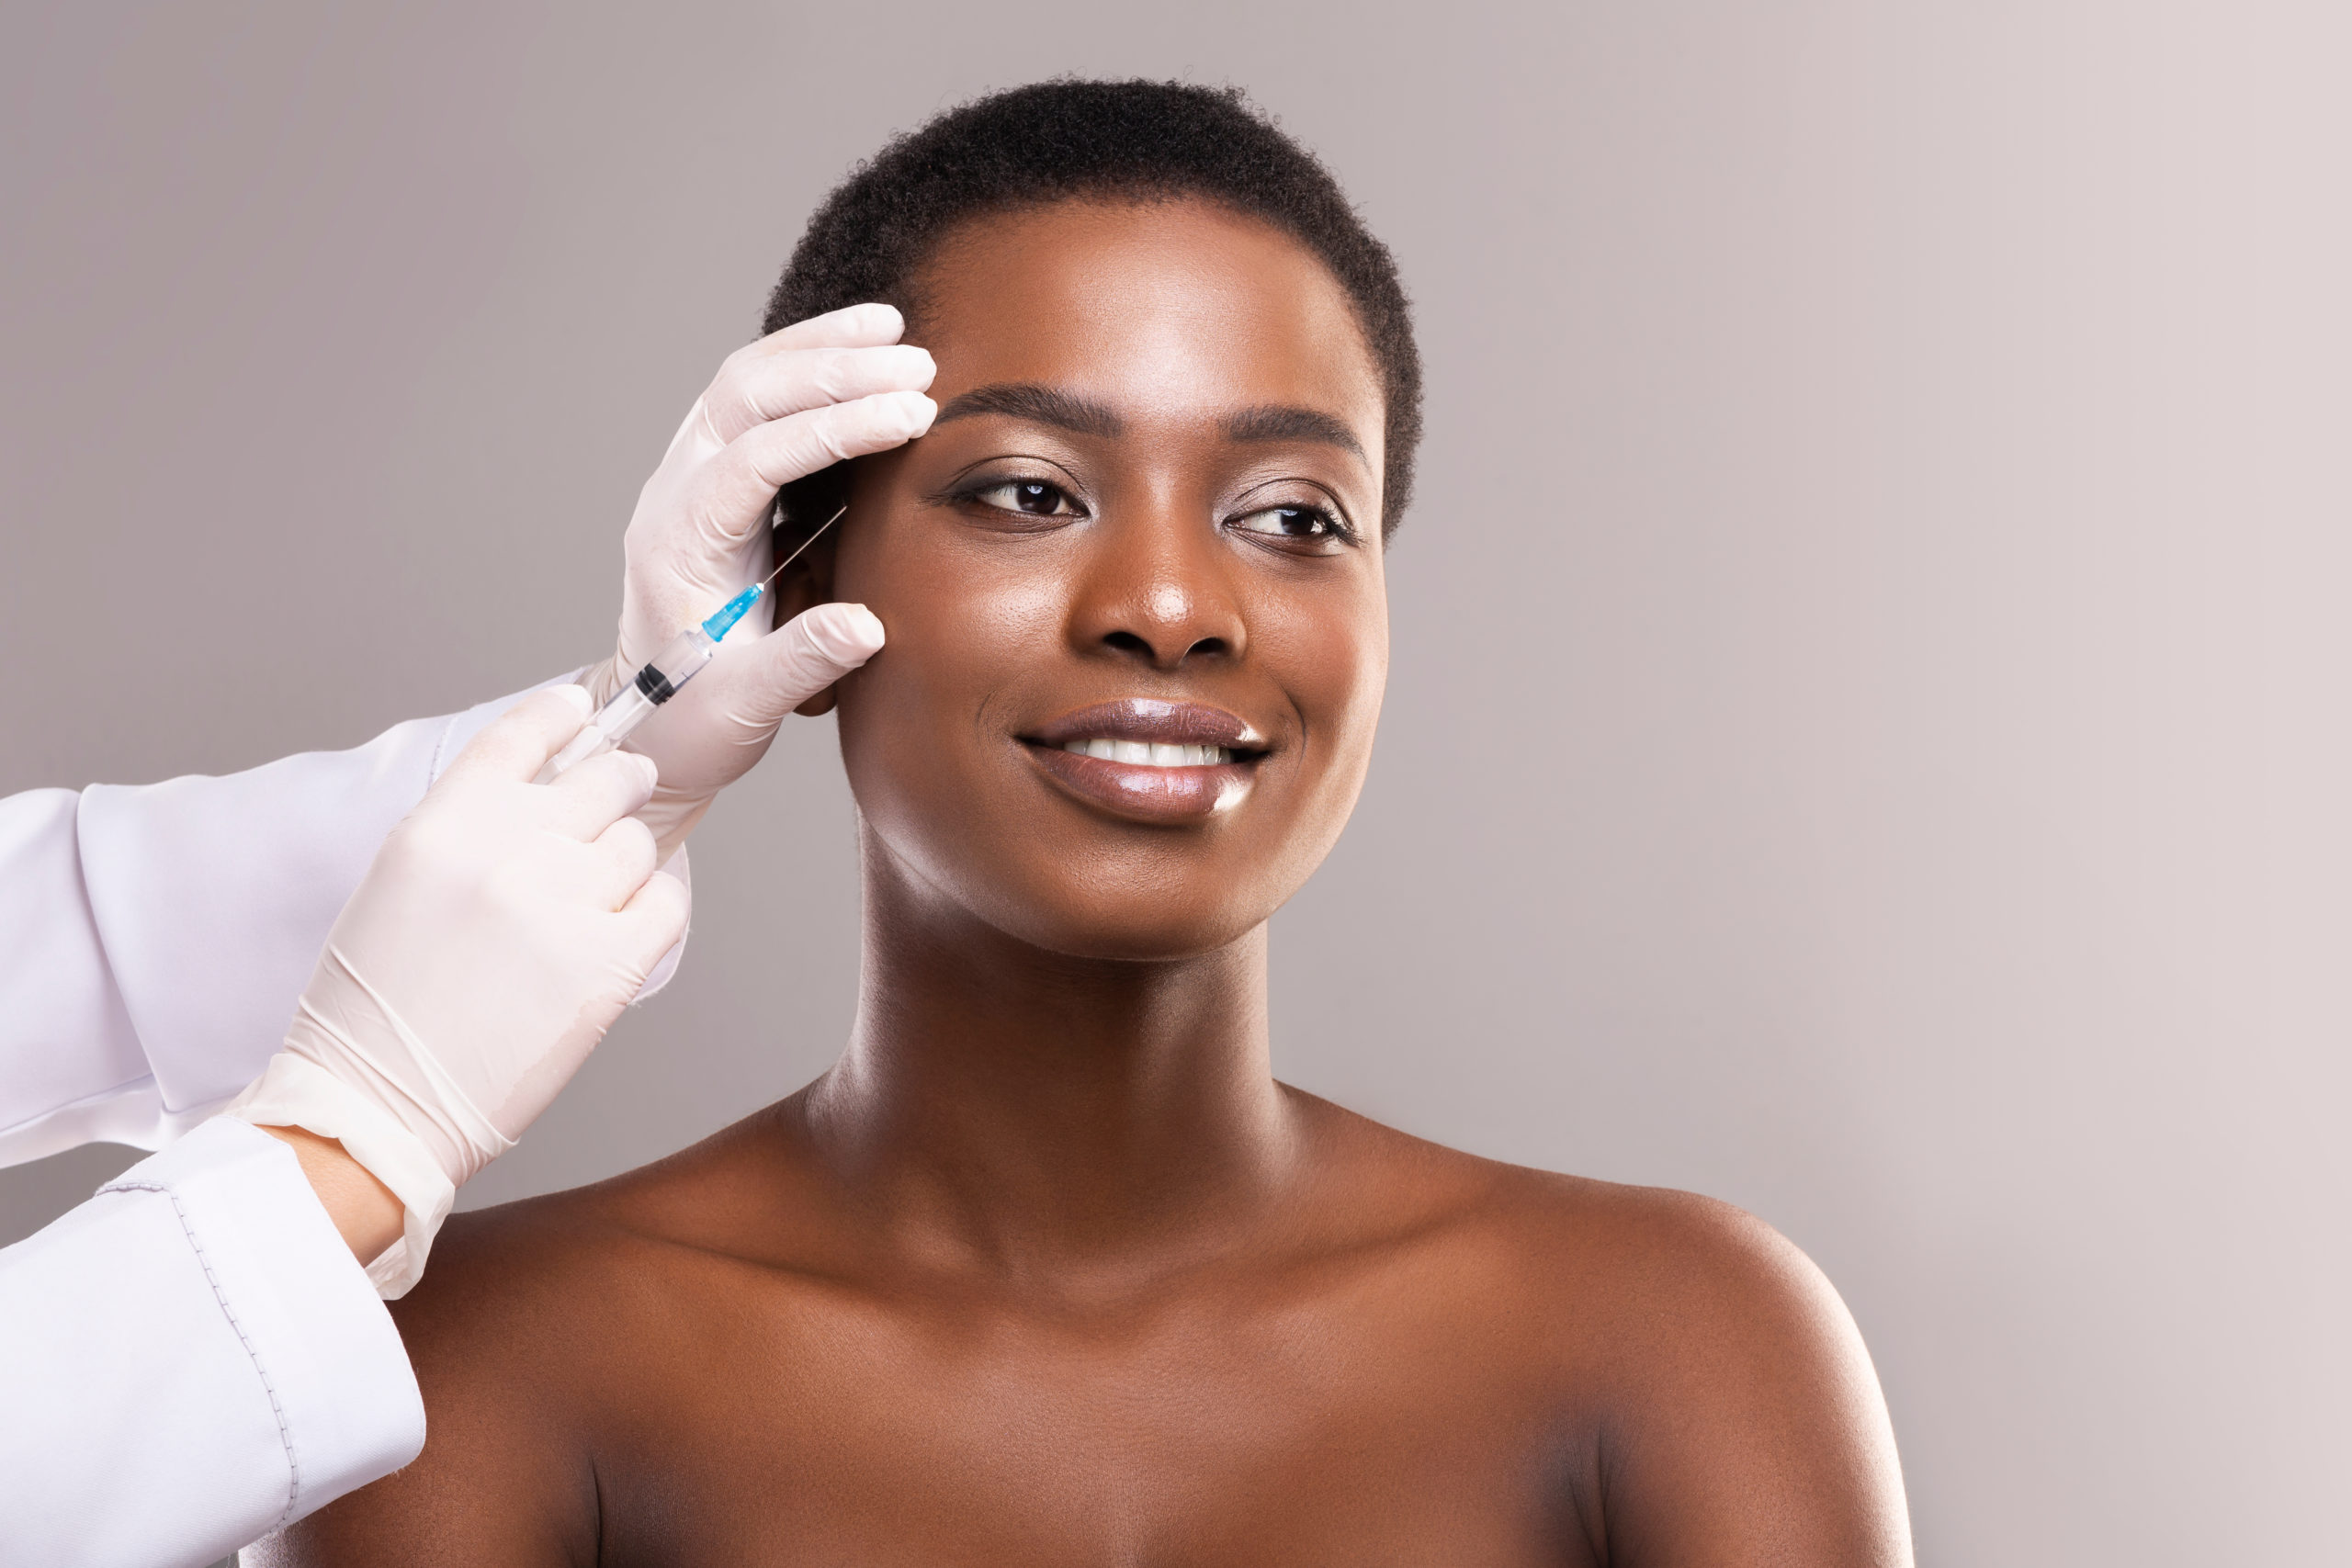 Juvéderm or Restylane: Which is the Better Filler?